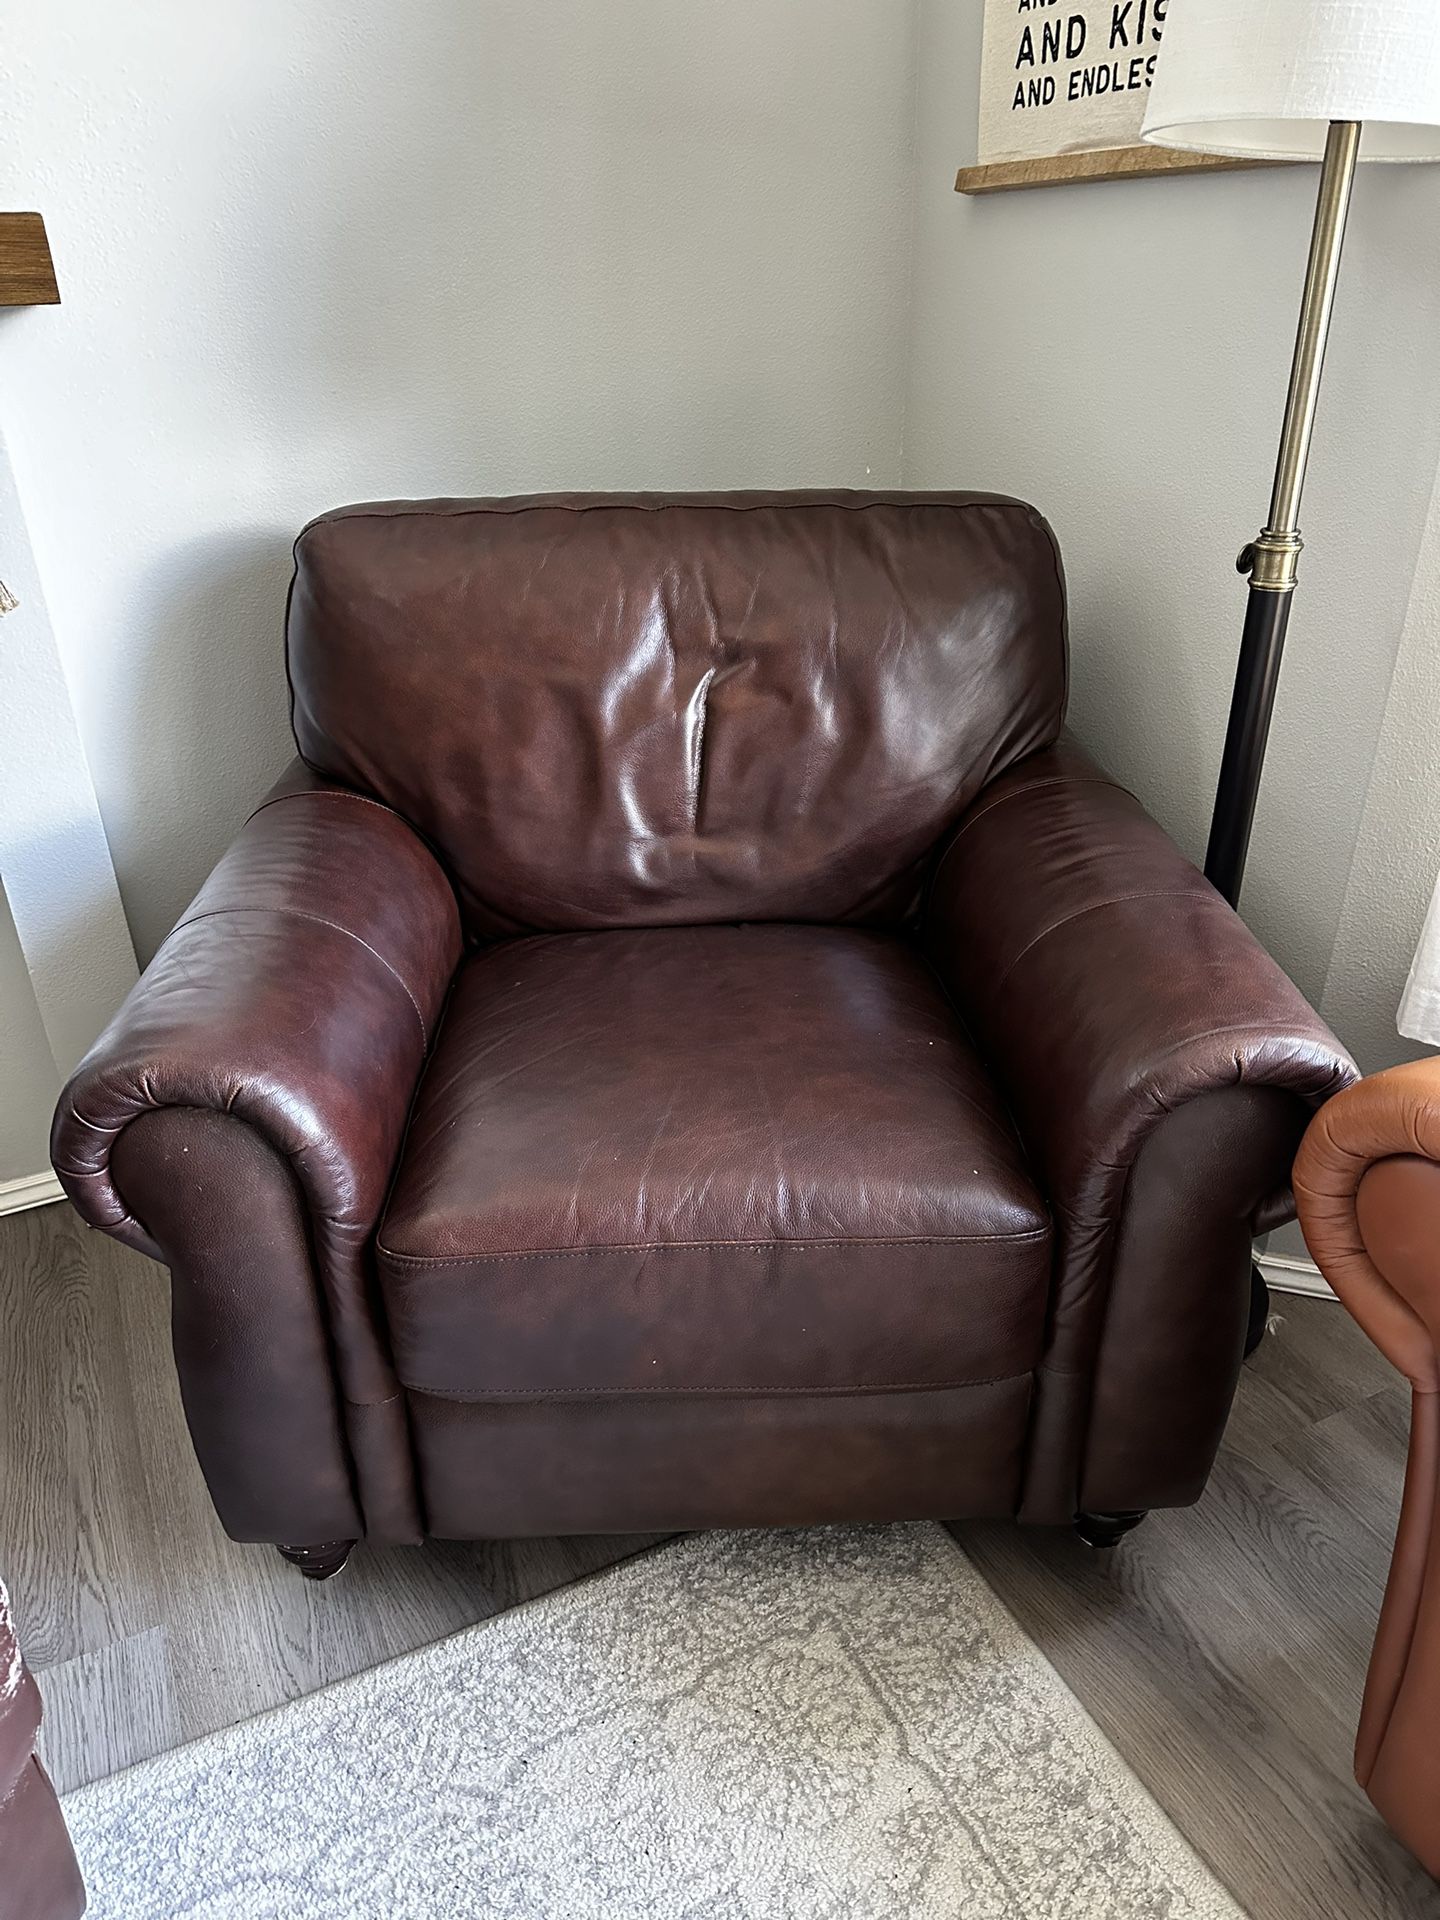 FREE Leather Arm Chair